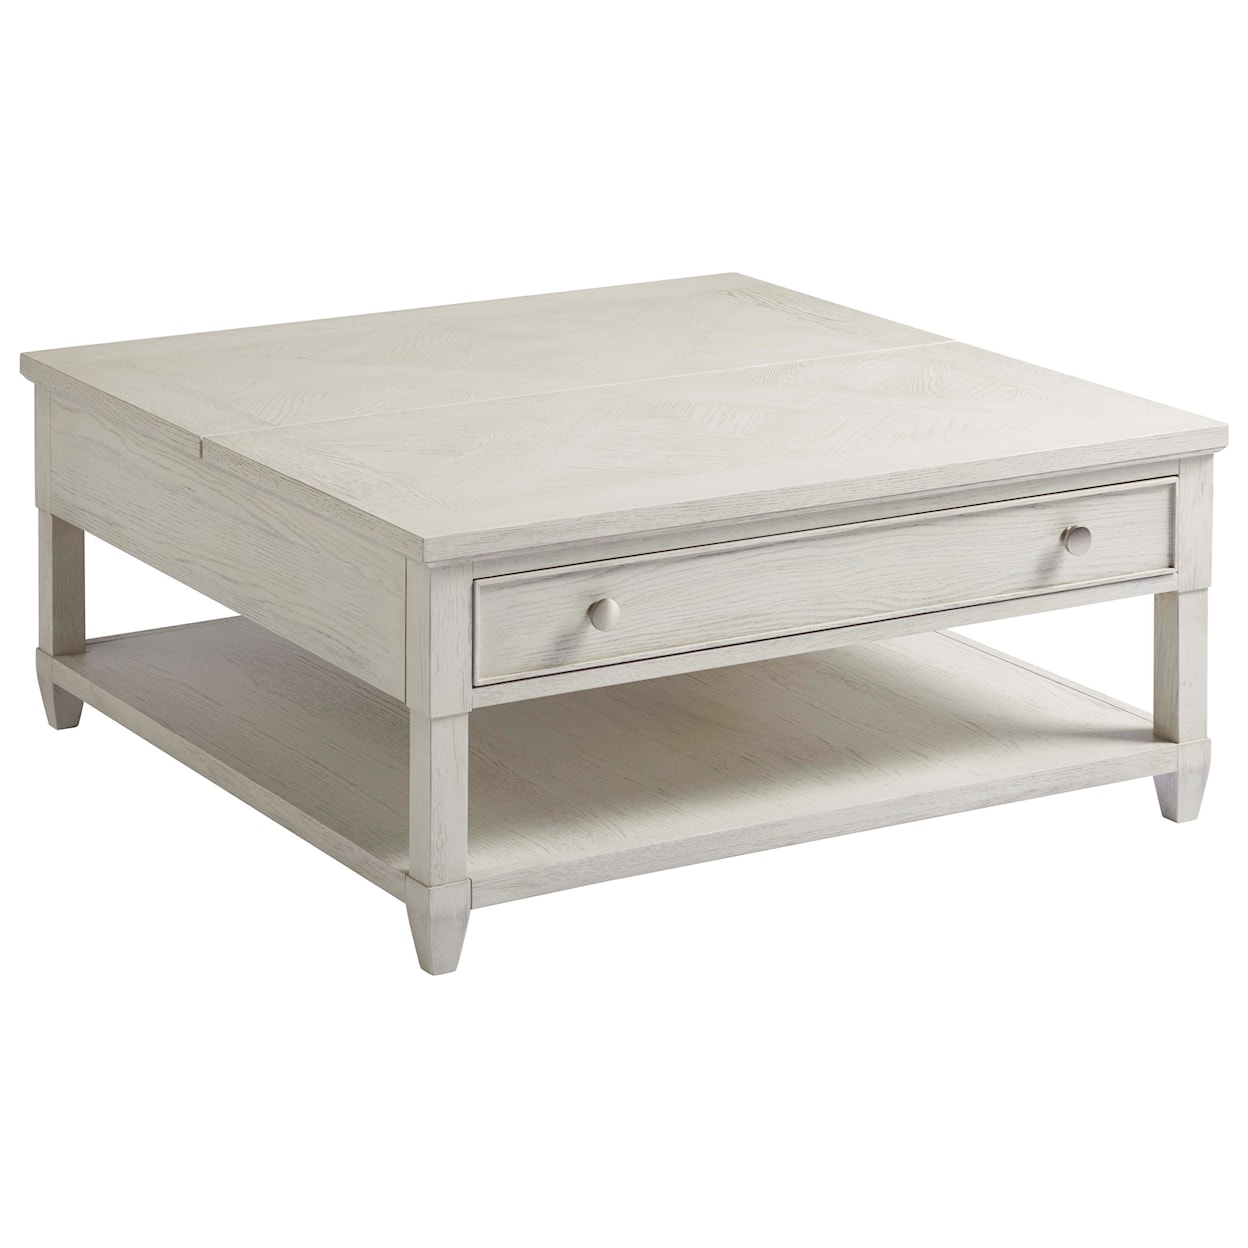 Universal Escape-Coastal Living Home Collection Topsail Lifttop Table